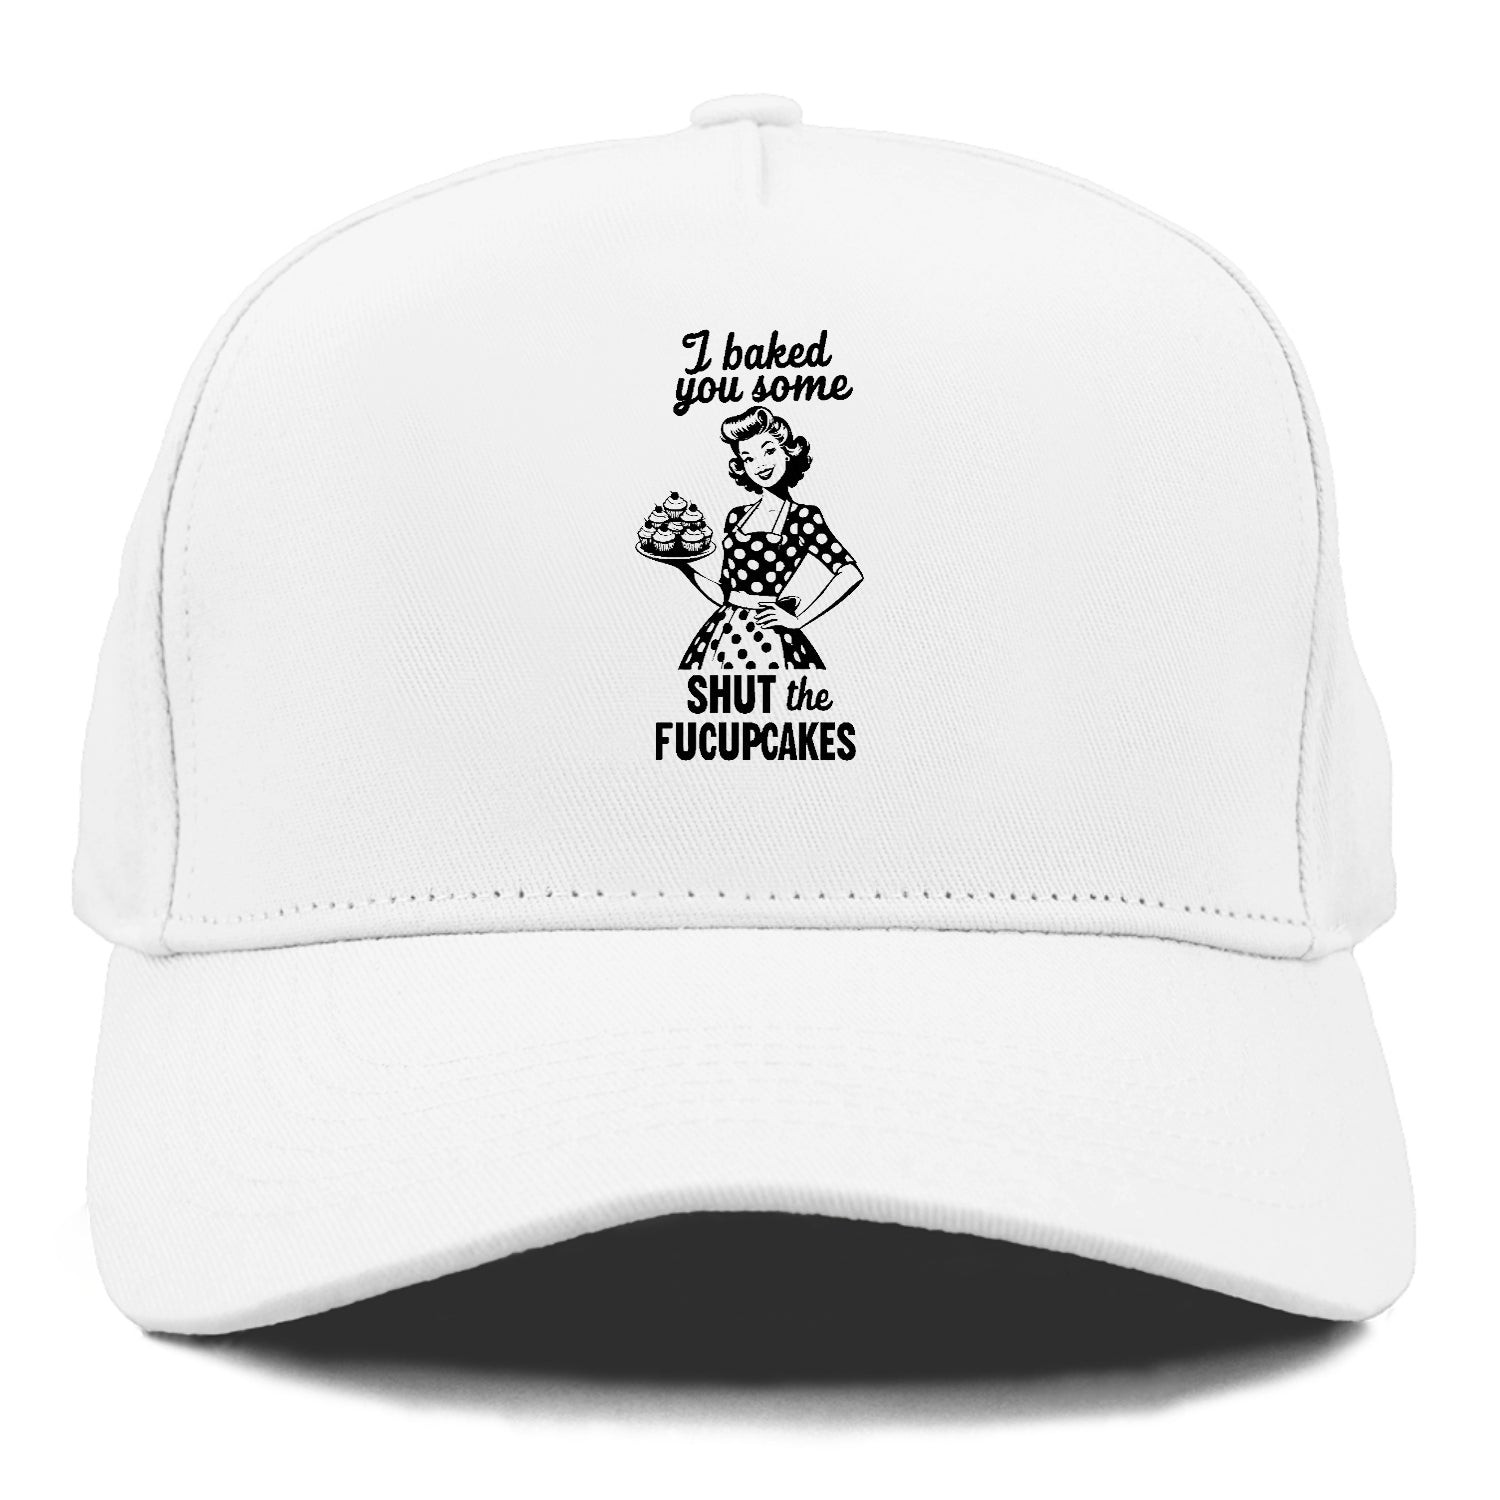 i baked you some shut the fucupcakes! Hat